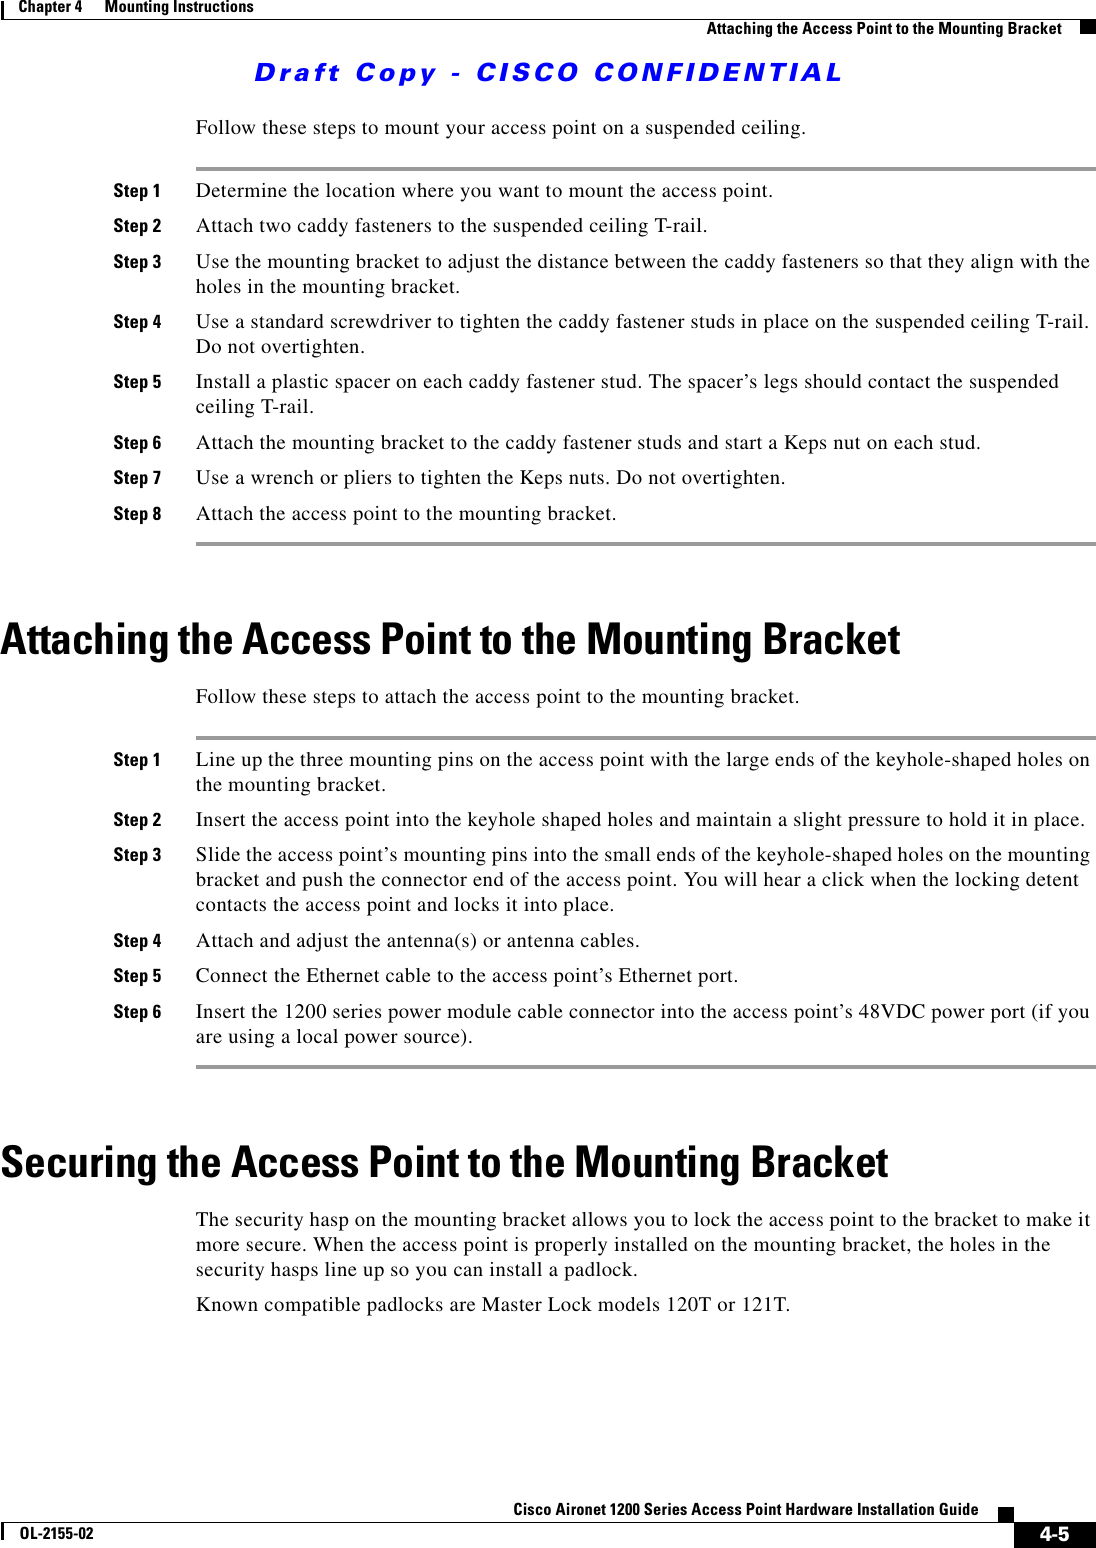 Draft Copy - CISCO CONFIDENTIAL 4-5Cisco Aironet 1200 Series Access Point Hardware Installation GuideOL-2155-02Chapter 4      Mounting InstructionsAttaching the Access Point to the Mounting BracketFollow these steps to mount your access point on a suspended ceiling.Step 1 Determine the location where you want to mount the access point.Step 2 Attach two caddy fasteners to the suspended ceiling T-rail.Step 3 Use the mounting bracket to adjust the distance between the caddy fasteners so that they align with the holes in the mounting bracket.Step 4 Use a standard screwdriver to tighten the caddy fastener studs in place on the suspended ceiling T-rail. Do not overtighten.Step 5 Install a plastic spacer on each caddy fastener stud. The spacer’s legs should contact the suspended ceiling T-rail.Step 6 Attach the mounting bracket to the caddy fastener studs and start a Keps nut on each stud.Step 7 Use a wrench or pliers to tighten the Keps nuts. Do not overtighten.Step 8 Attach the access point to the mounting bracket.Attaching the Access Point to the Mounting BracketFollow these steps to attach the access point to the mounting bracket.Step 1 Line up the three mounting pins on the access point with the large ends of the keyhole-shaped holes on the mounting bracket.Step 2 Insert the access point into the keyhole shaped holes and maintain a slight pressure to hold it in place.Step 3 Slide the access point’s mounting pins into the small ends of the keyhole-shaped holes on the mounting bracket and push the connector end of the access point. You will hear a click when the locking detent contacts the access point and locks it into place.Step 4 Attach and adjust the antenna(s) or antenna cables.Step 5 Connect the Ethernet cable to the access point’s Ethernet port.Step 6 Insert the 1200 series power module cable connector into the access point’s 48VDC power port (if you are using a local power source).Securing the Access Point to the Mounting BracketThe security hasp on the mounting bracket allows you to lock the access point to the bracket to make it more secure. When the access point is properly installed on the mounting bracket, the holes in the security hasps line up so you can install a padlock.Known compatible padlocks are Master Lock models 120T or 121T.